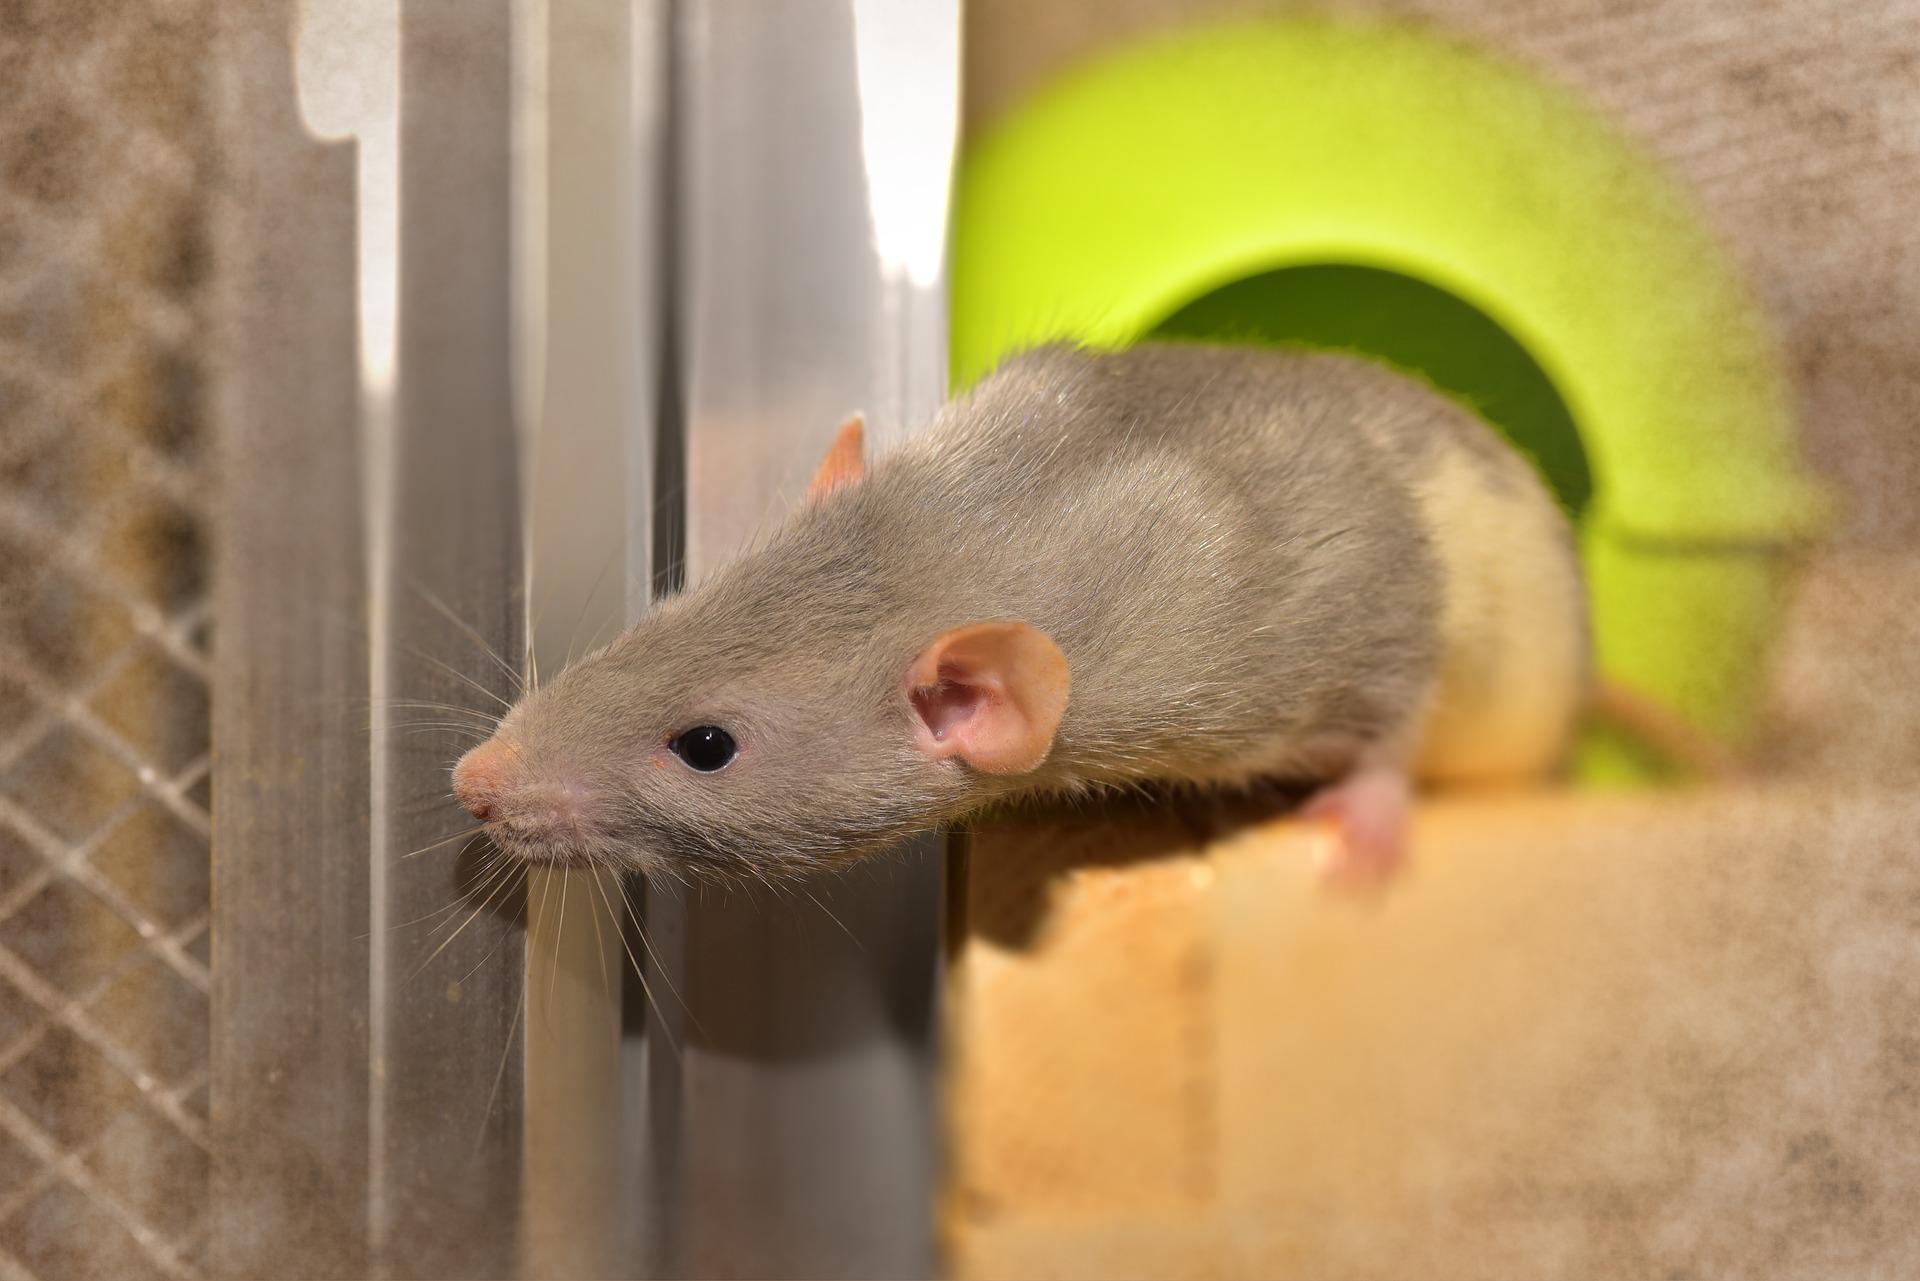 How to Get Rid of Mice: Ideas That Keep Kids and Pets Safe